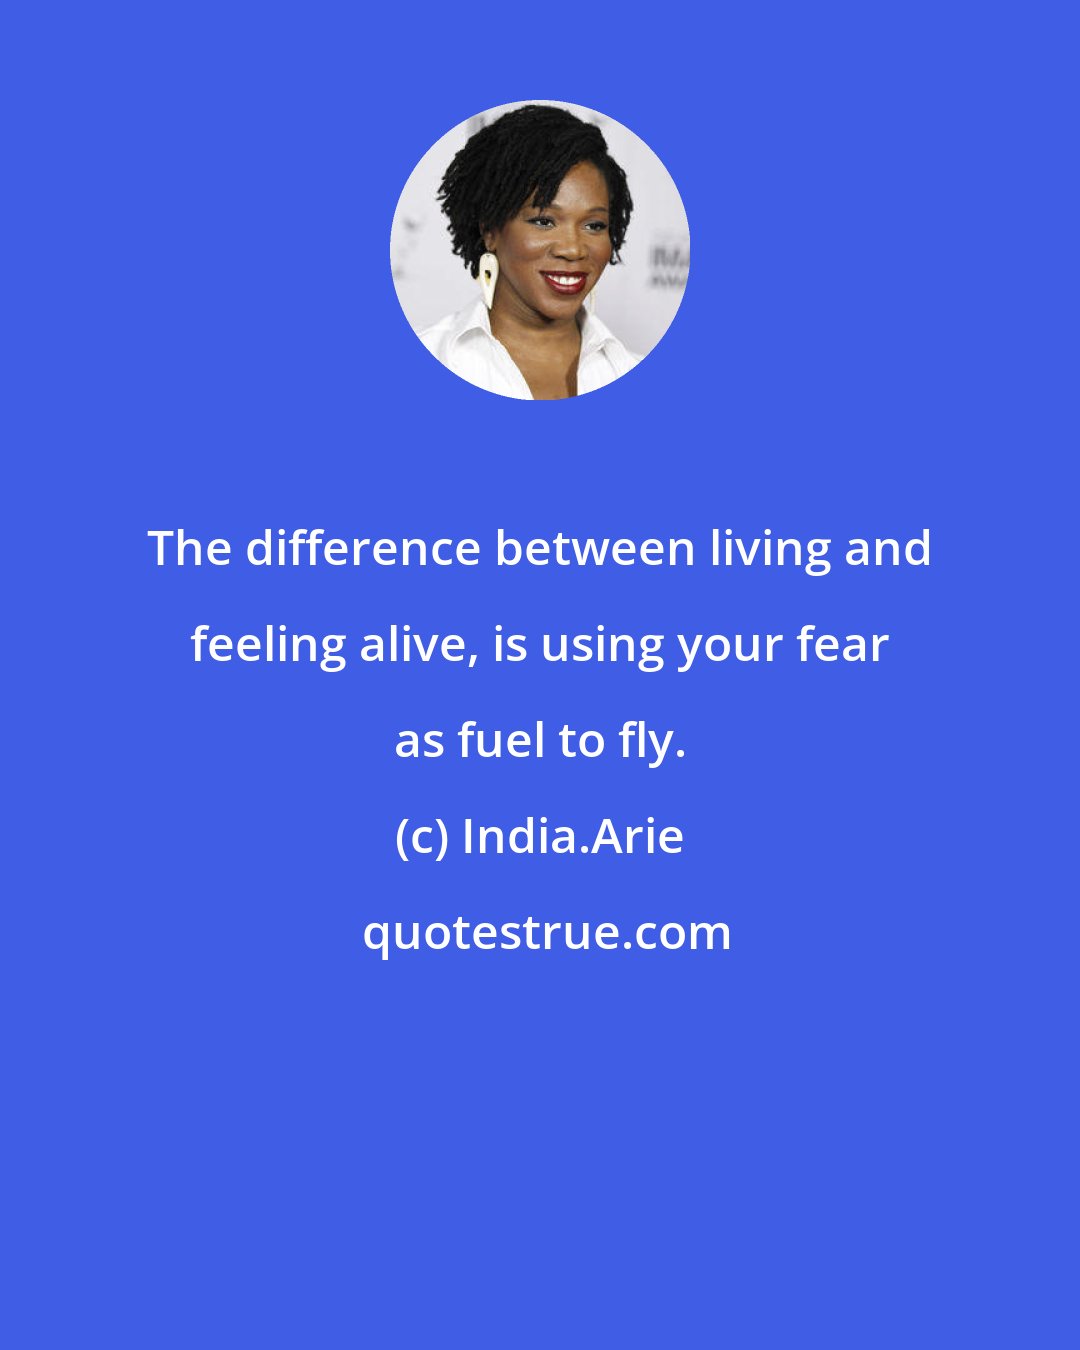 India.Arie: The difference between living and feeling alive, is using your fear as fuel to fly.